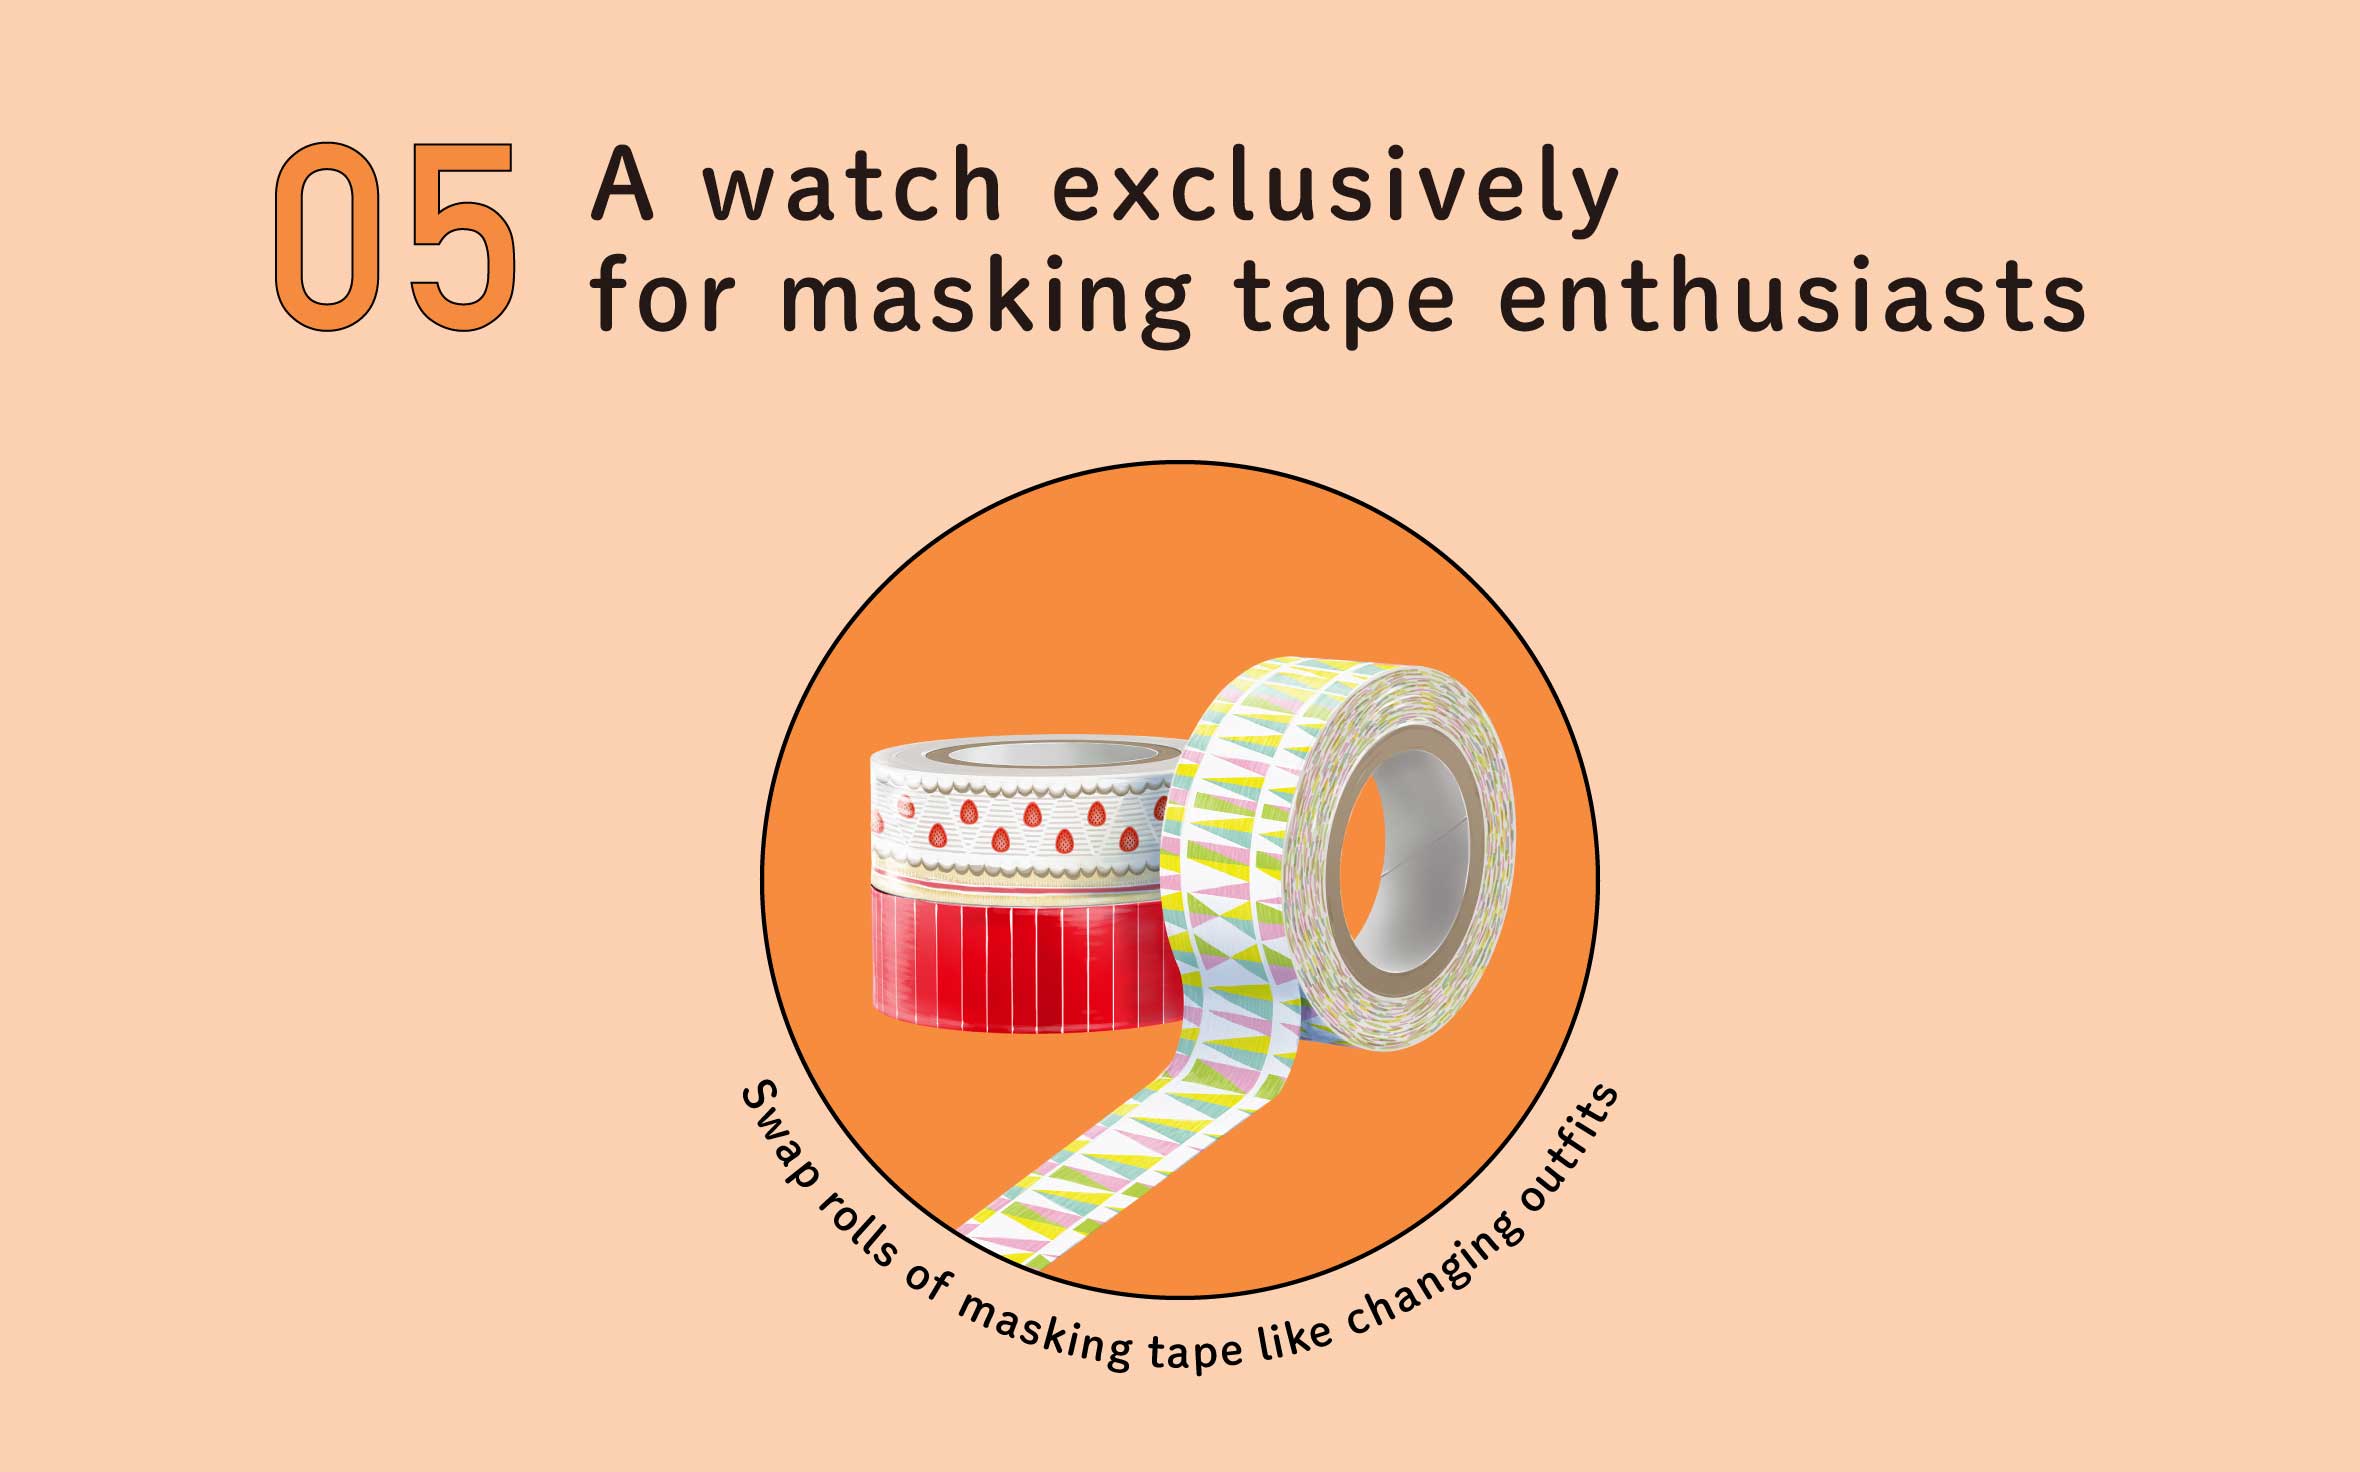 A watch exclusively for masking tape enthusiasts